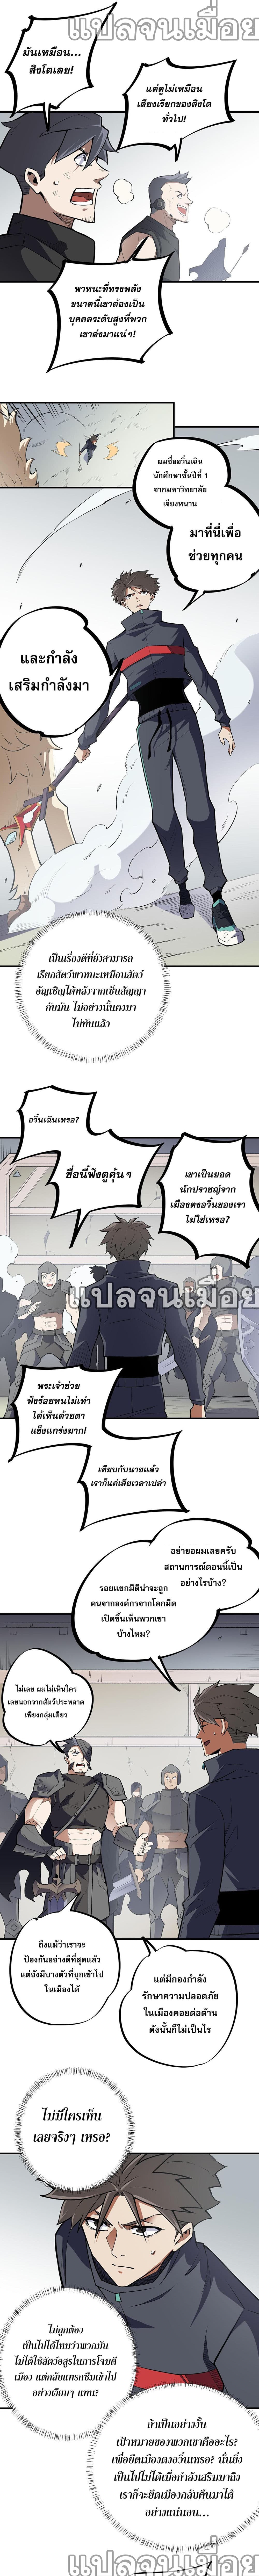 Job Changing for the Entire Population: The Jobless Me Will Terminate the Gods ฉันคือผู้เล่นไร้อาชีพที่สังหารเหล่าเทพ 46-46